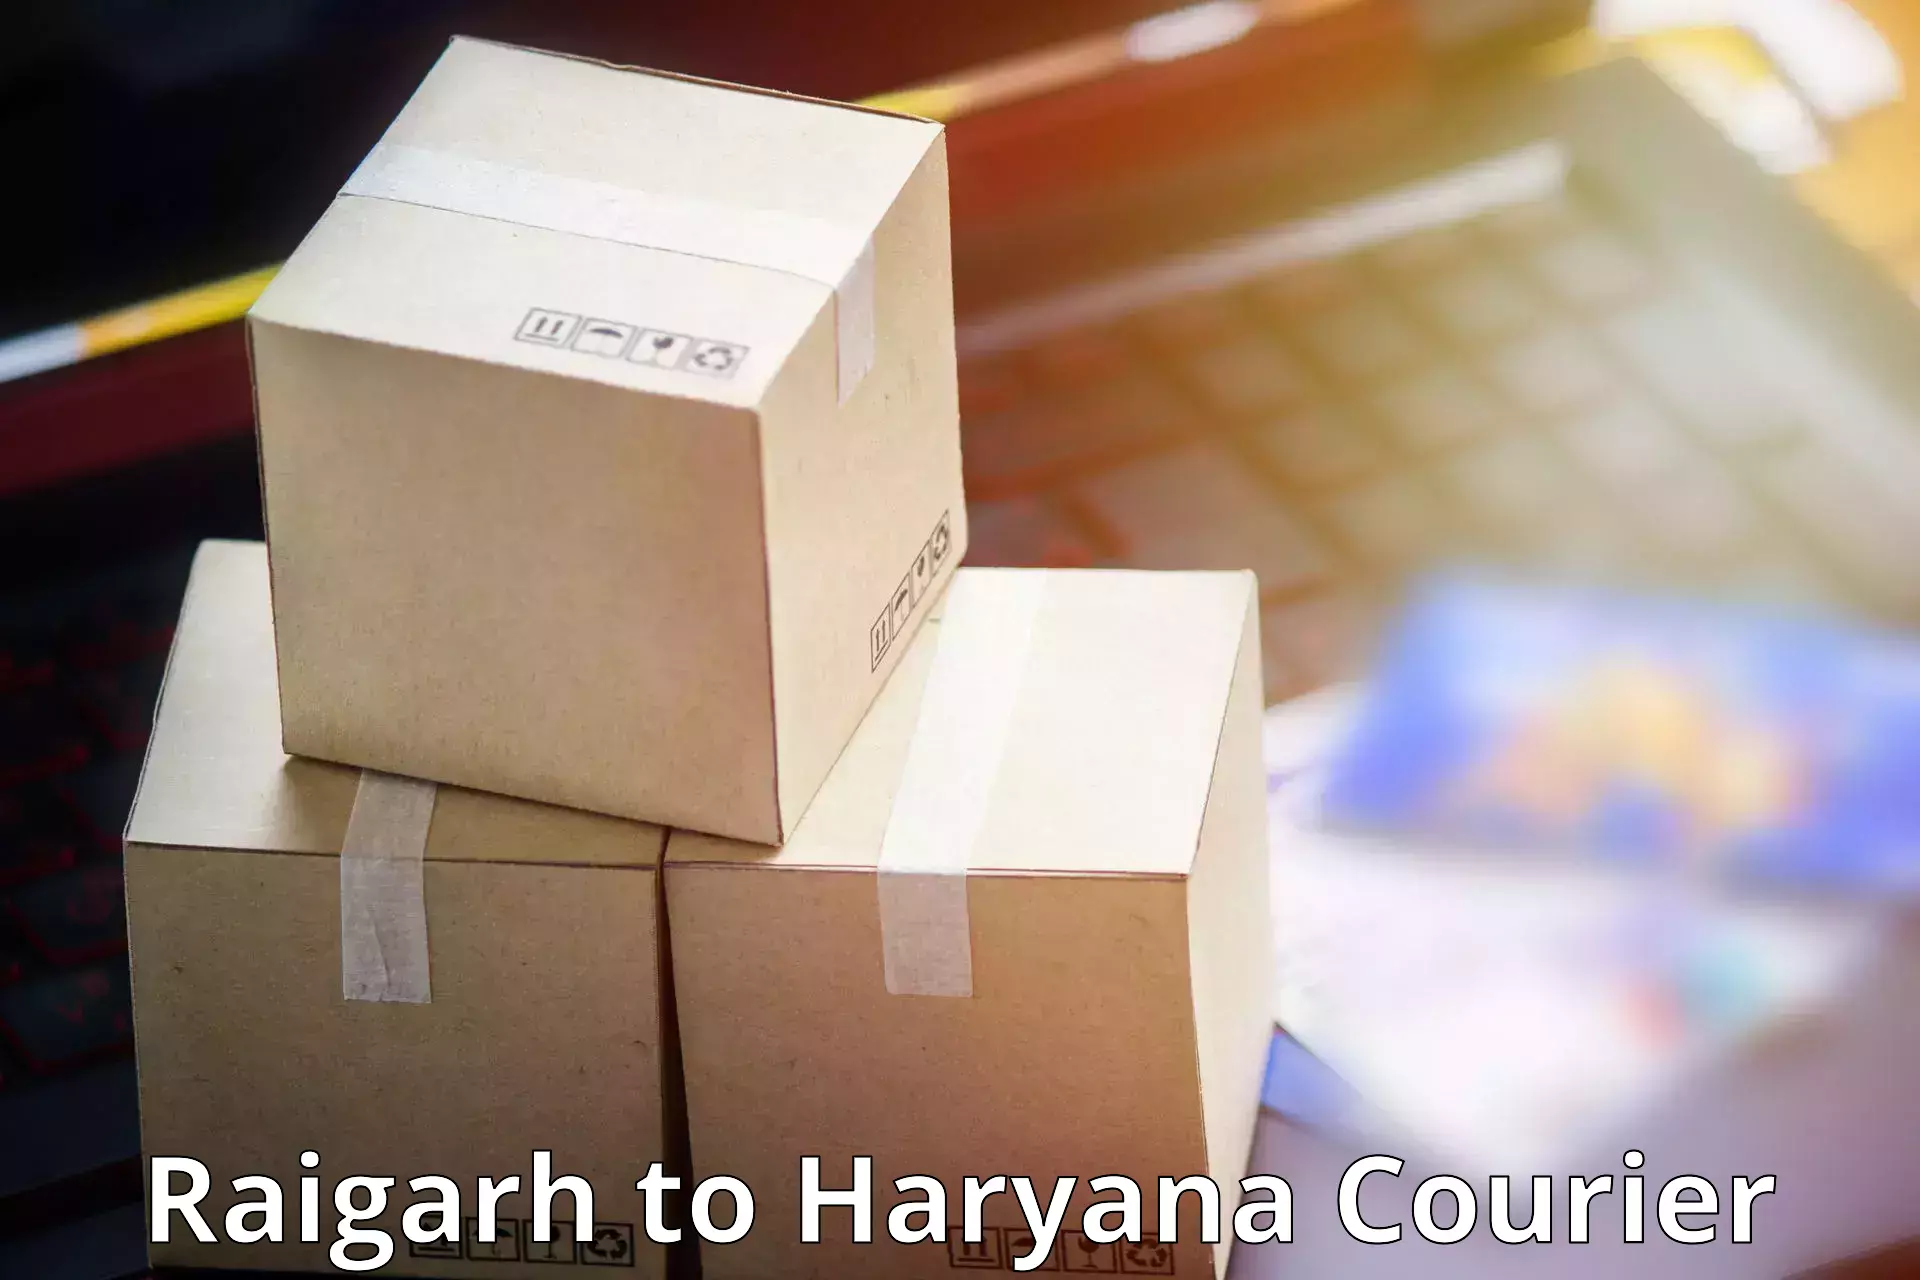 Courier insurance Raigarh to Pinjore